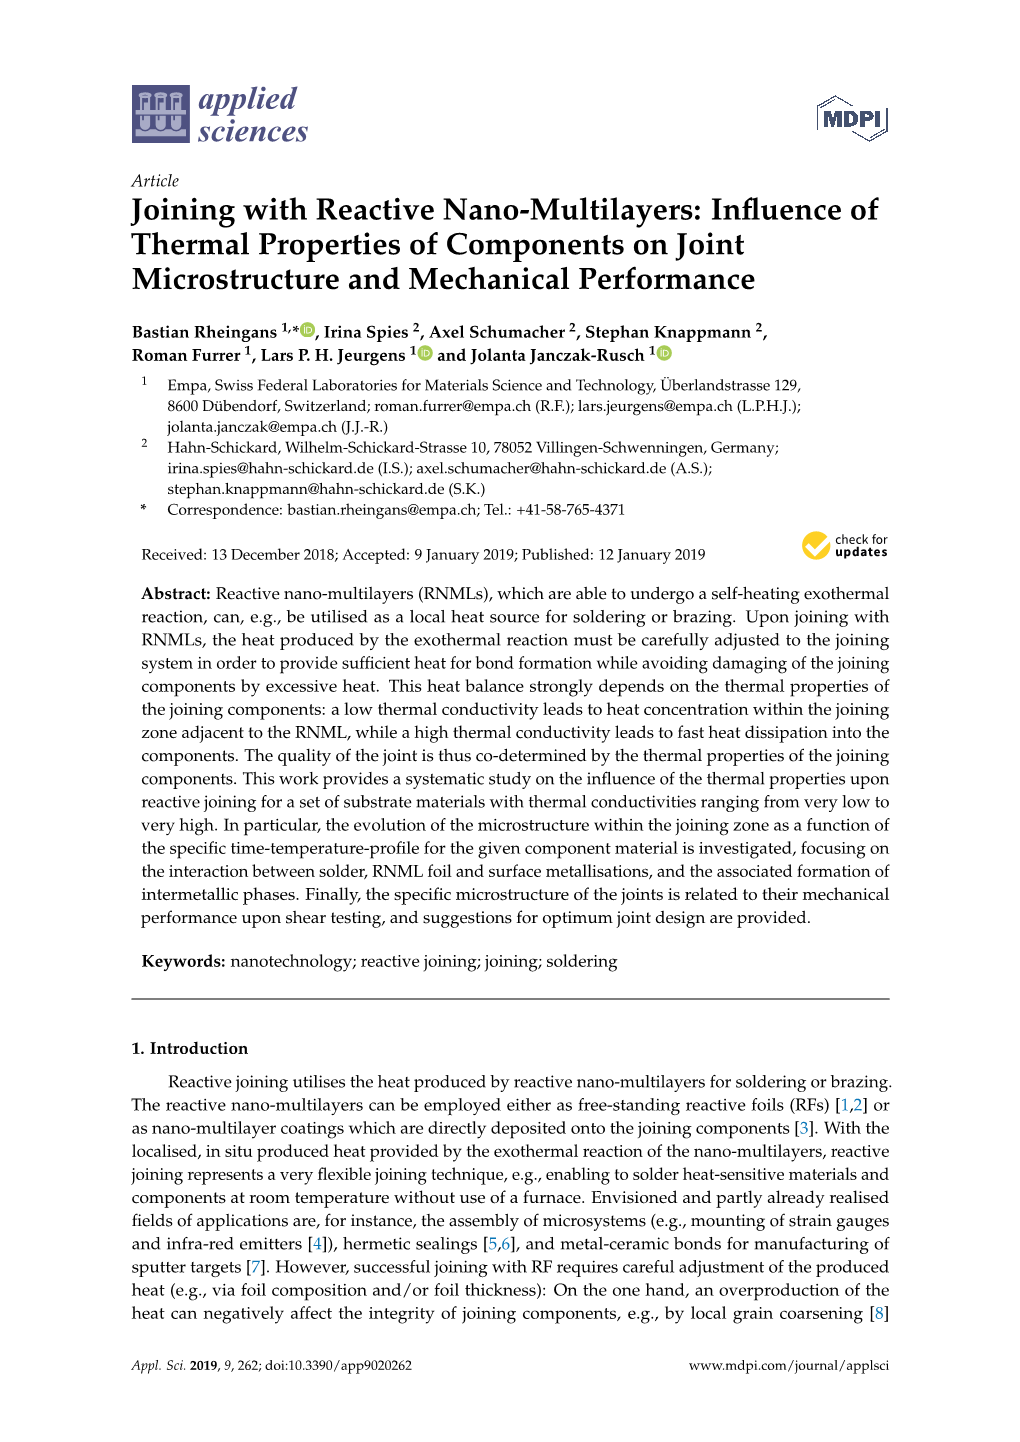 Joining with Reactive Nano-Multilayers: Influence of Thermal Properties of Components on Joint Microstructure and Mechanical Performance